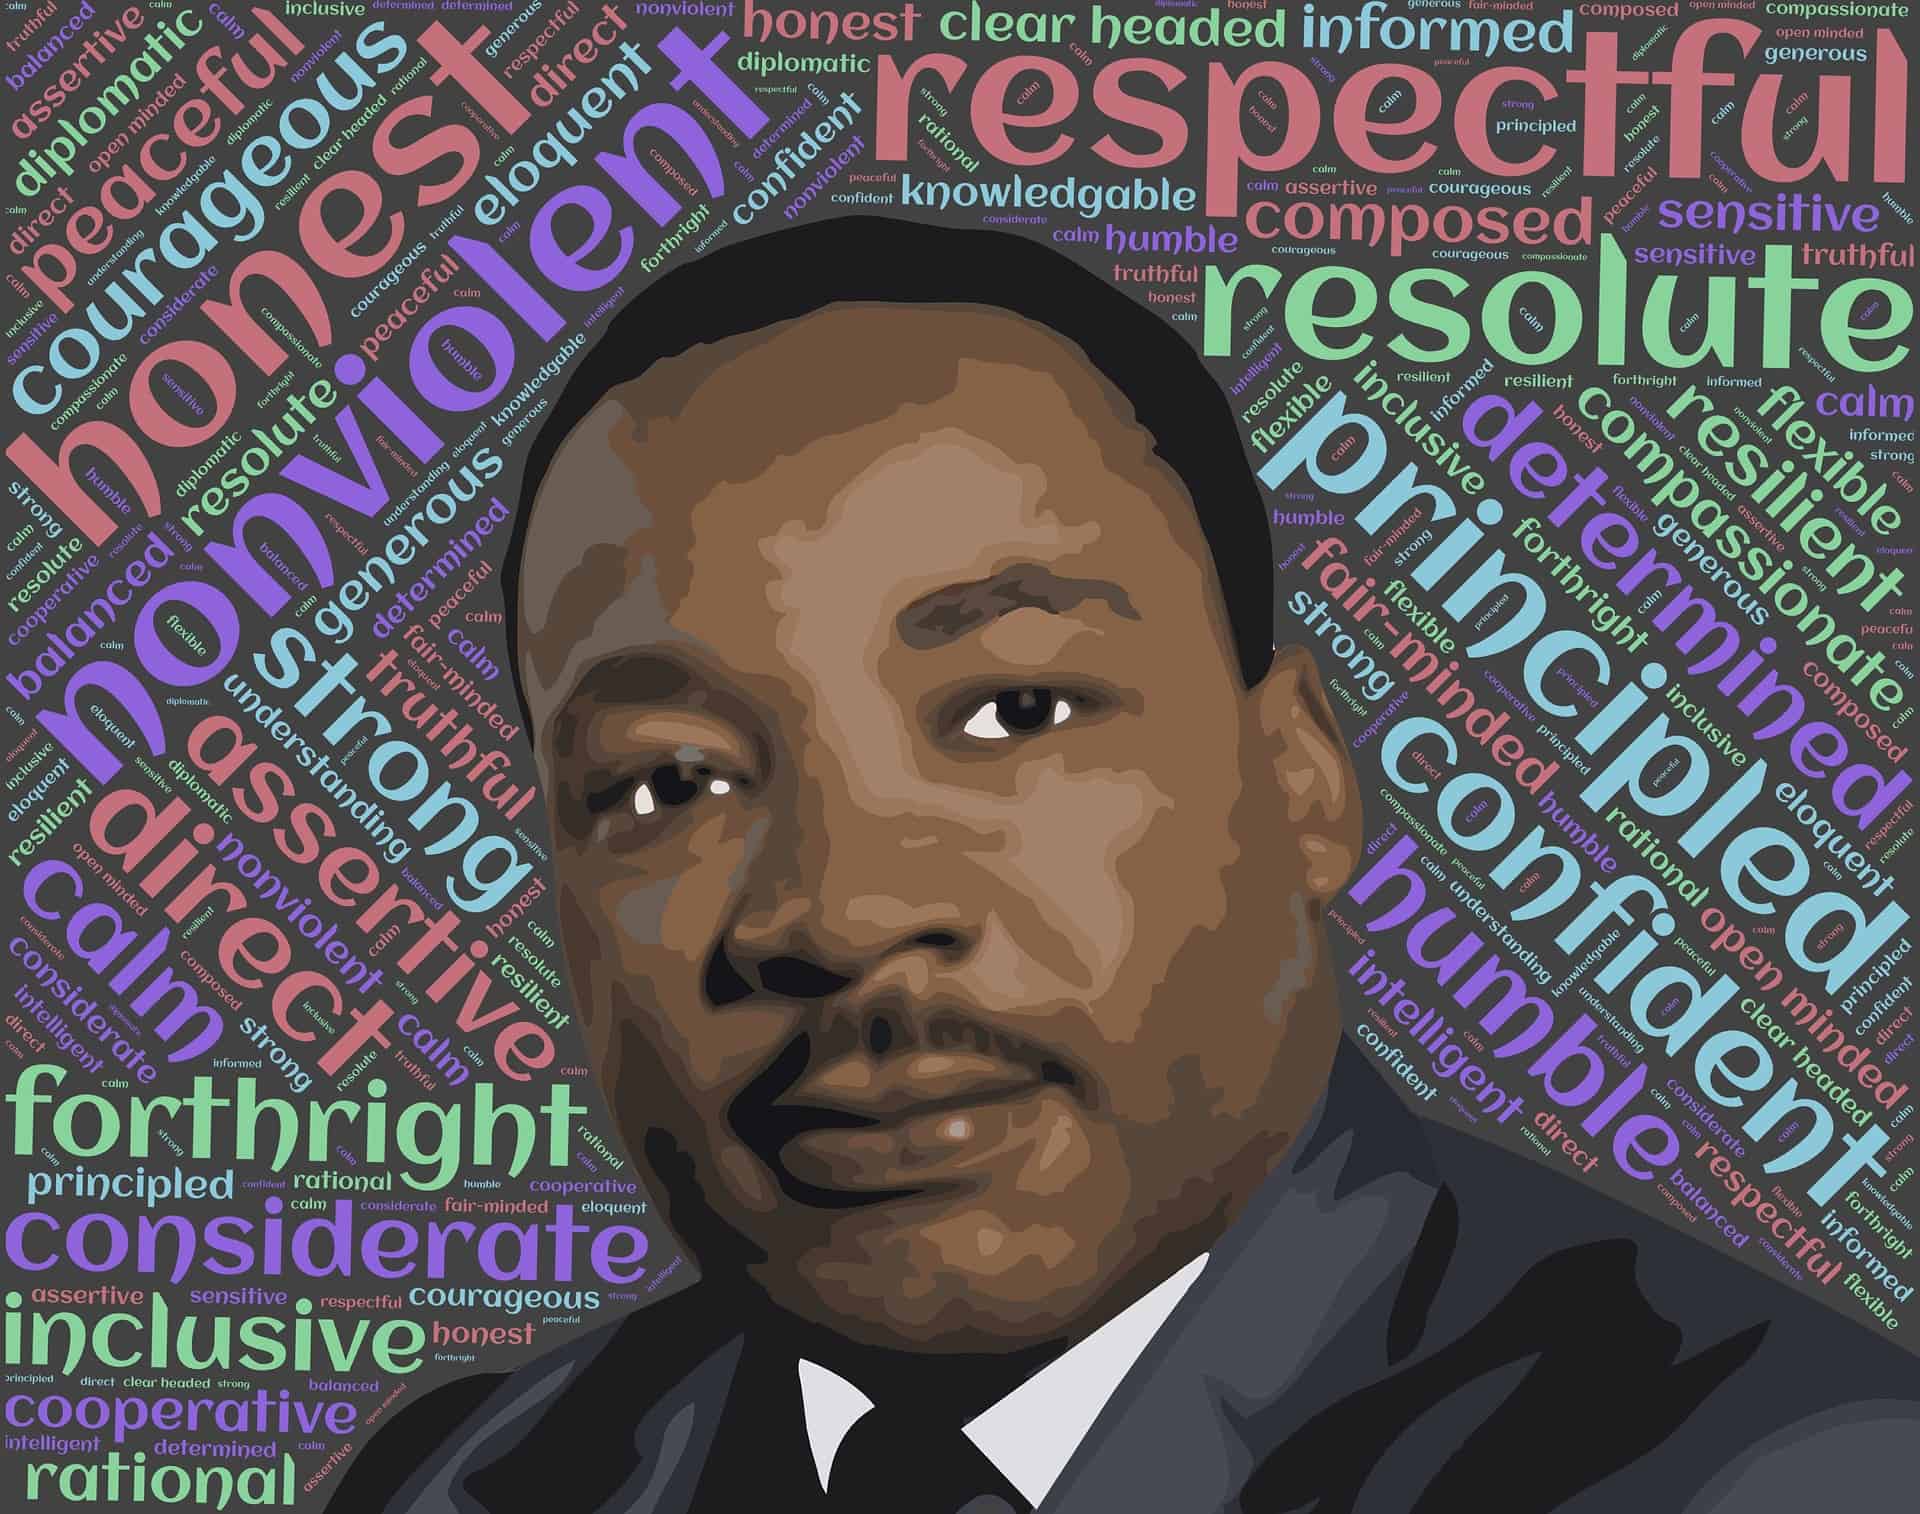 image of Martin Luther King, Jr.